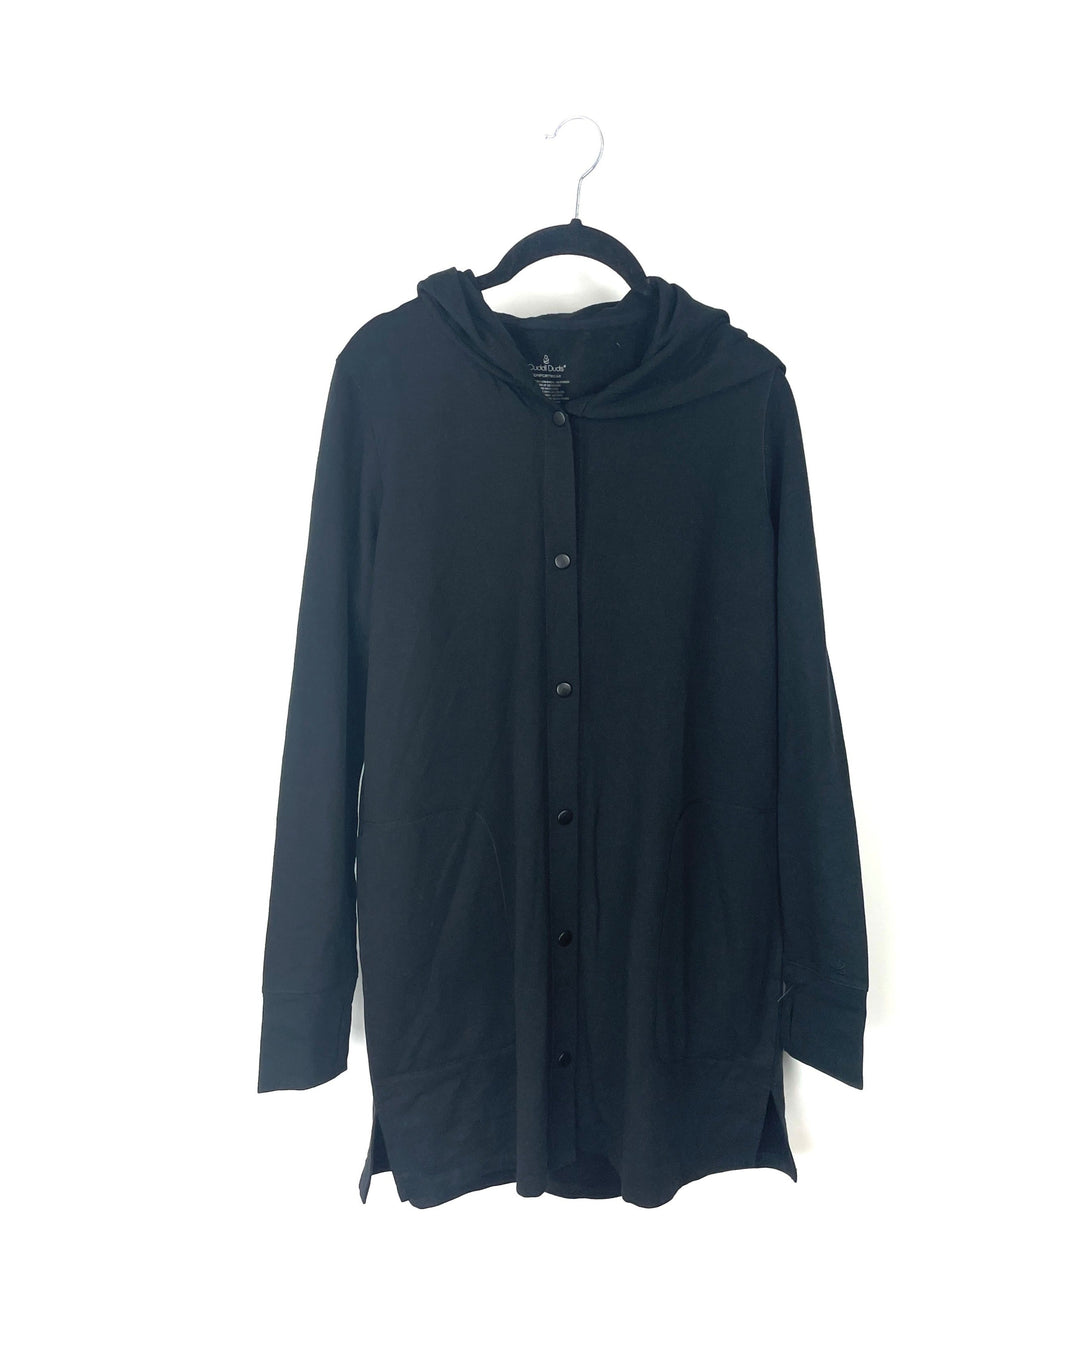 Black Buttoned Hooded Cardigan - Extra Small